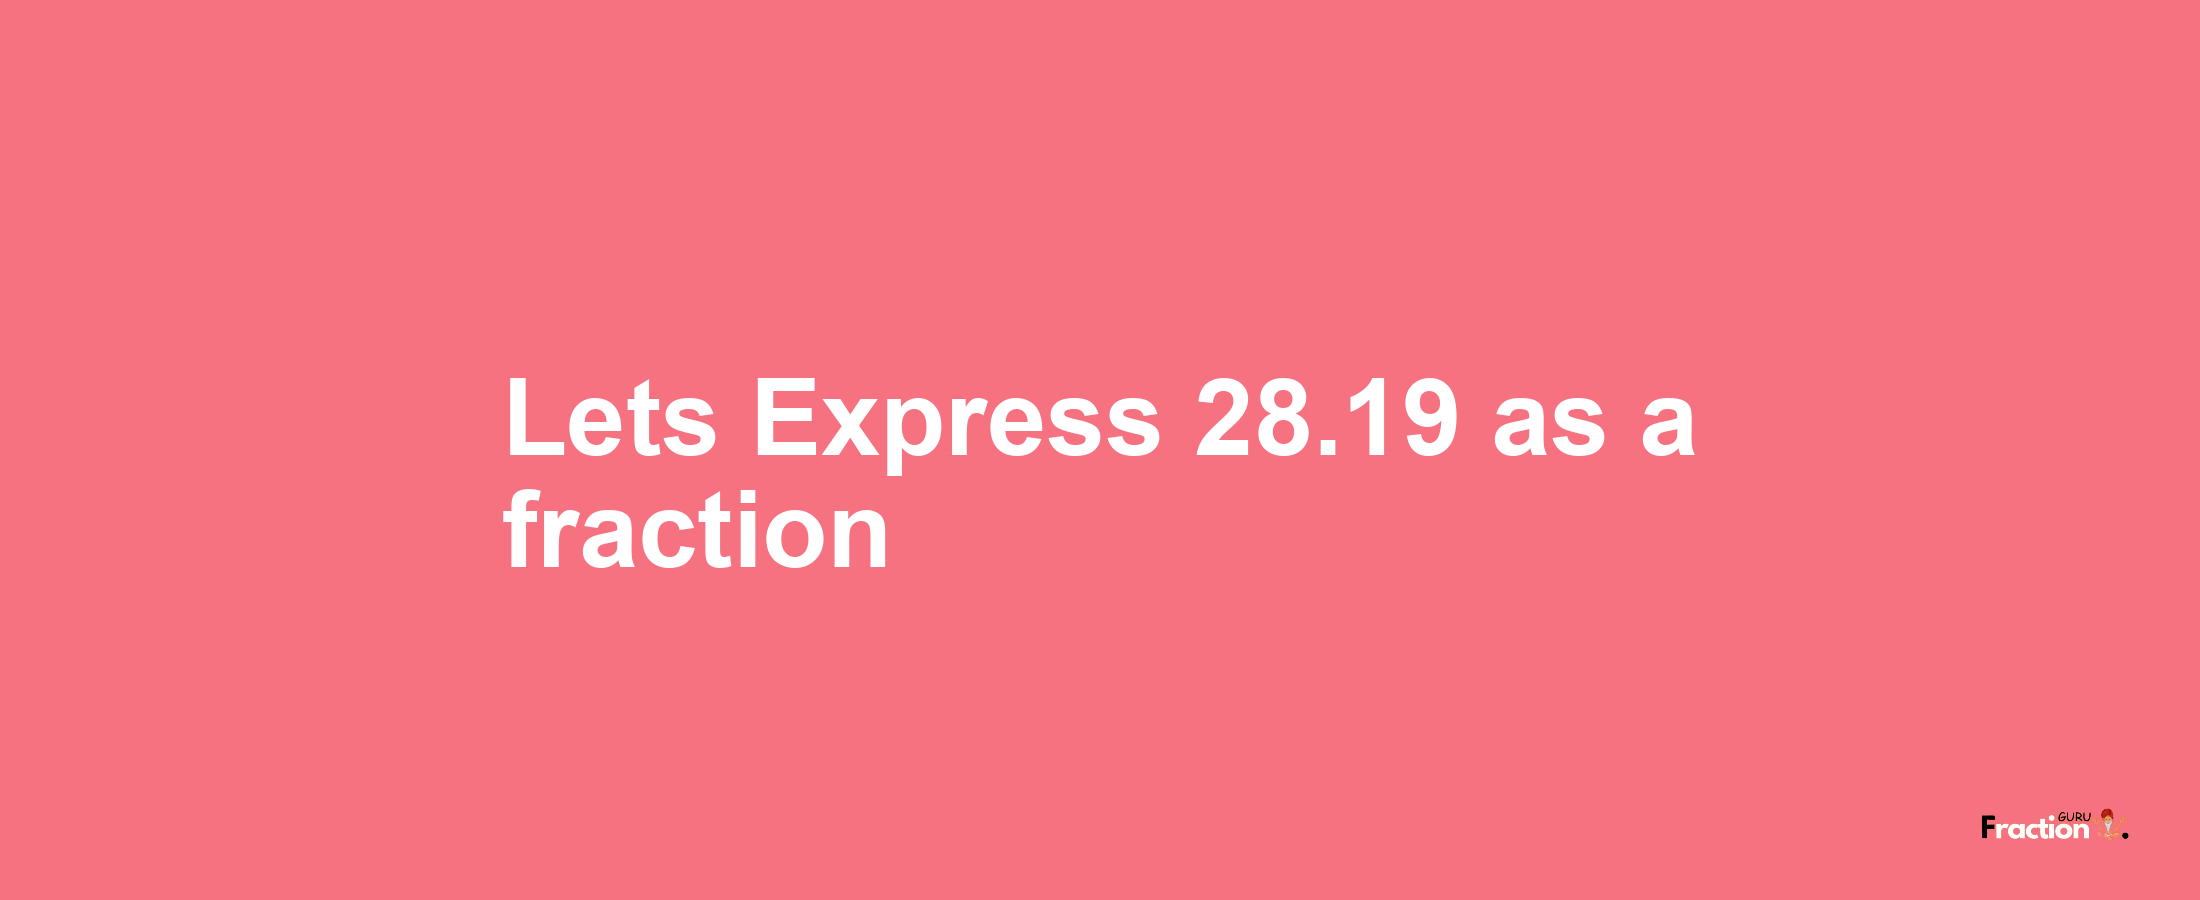 Lets Express 28.19 as afraction